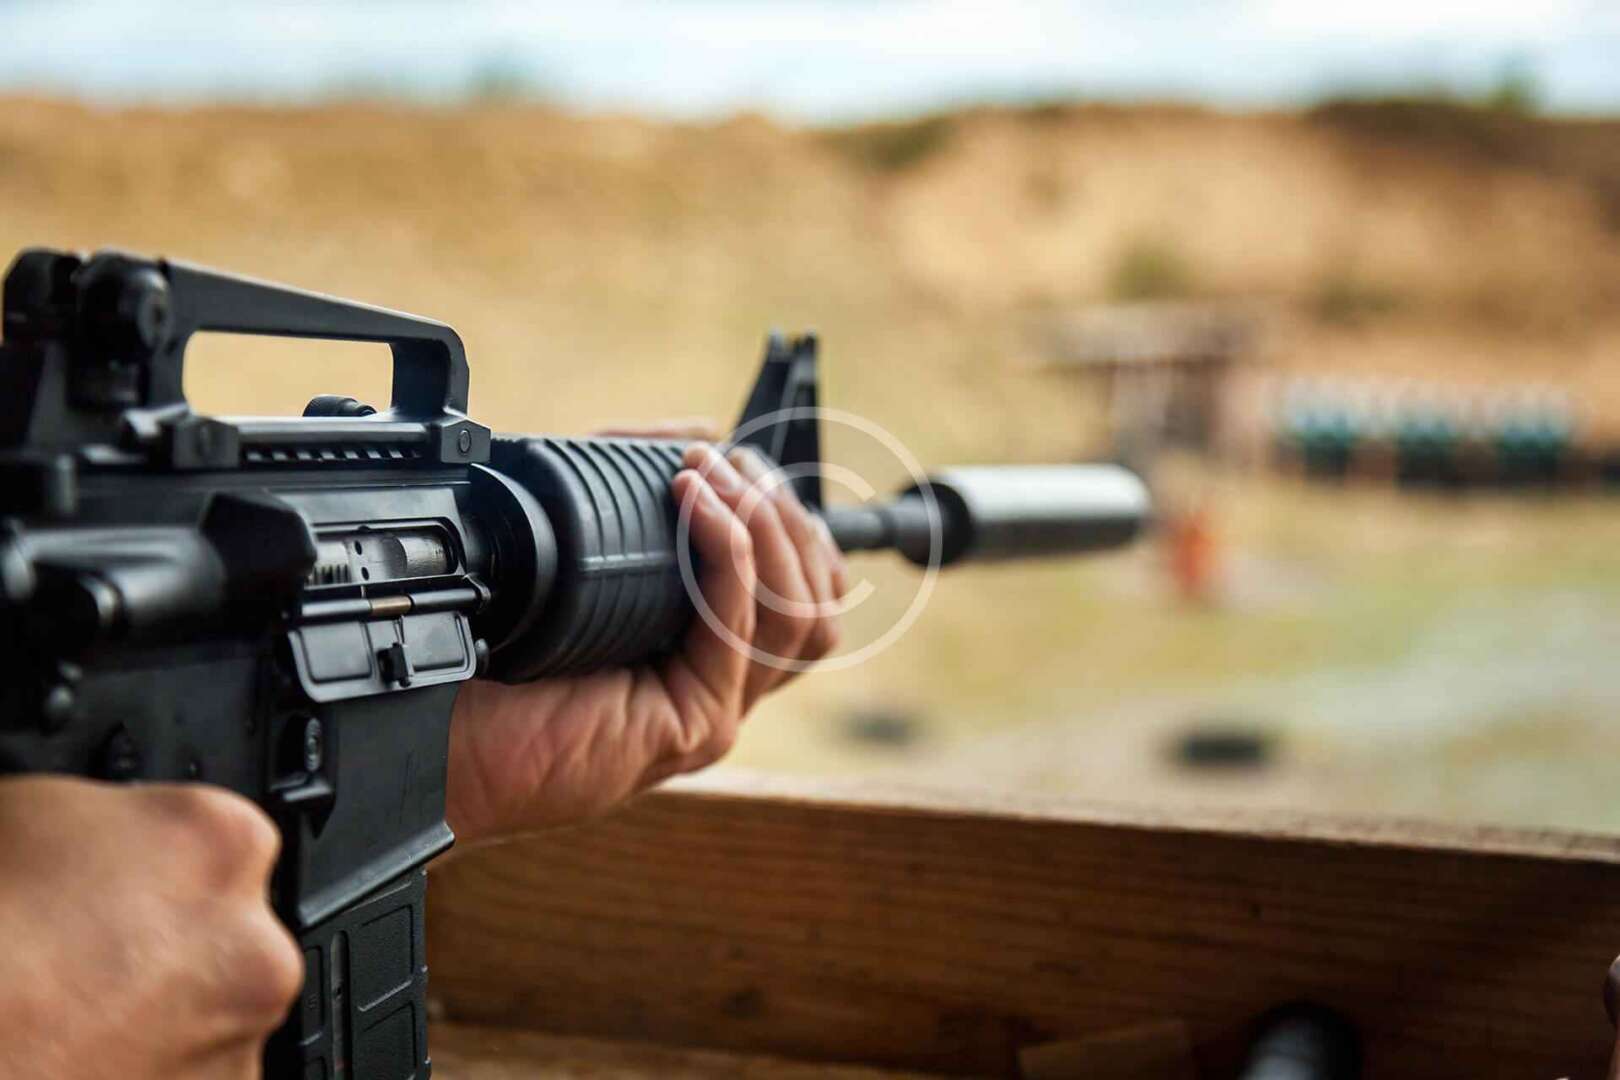 A person is holding an ar - 15 rifle.